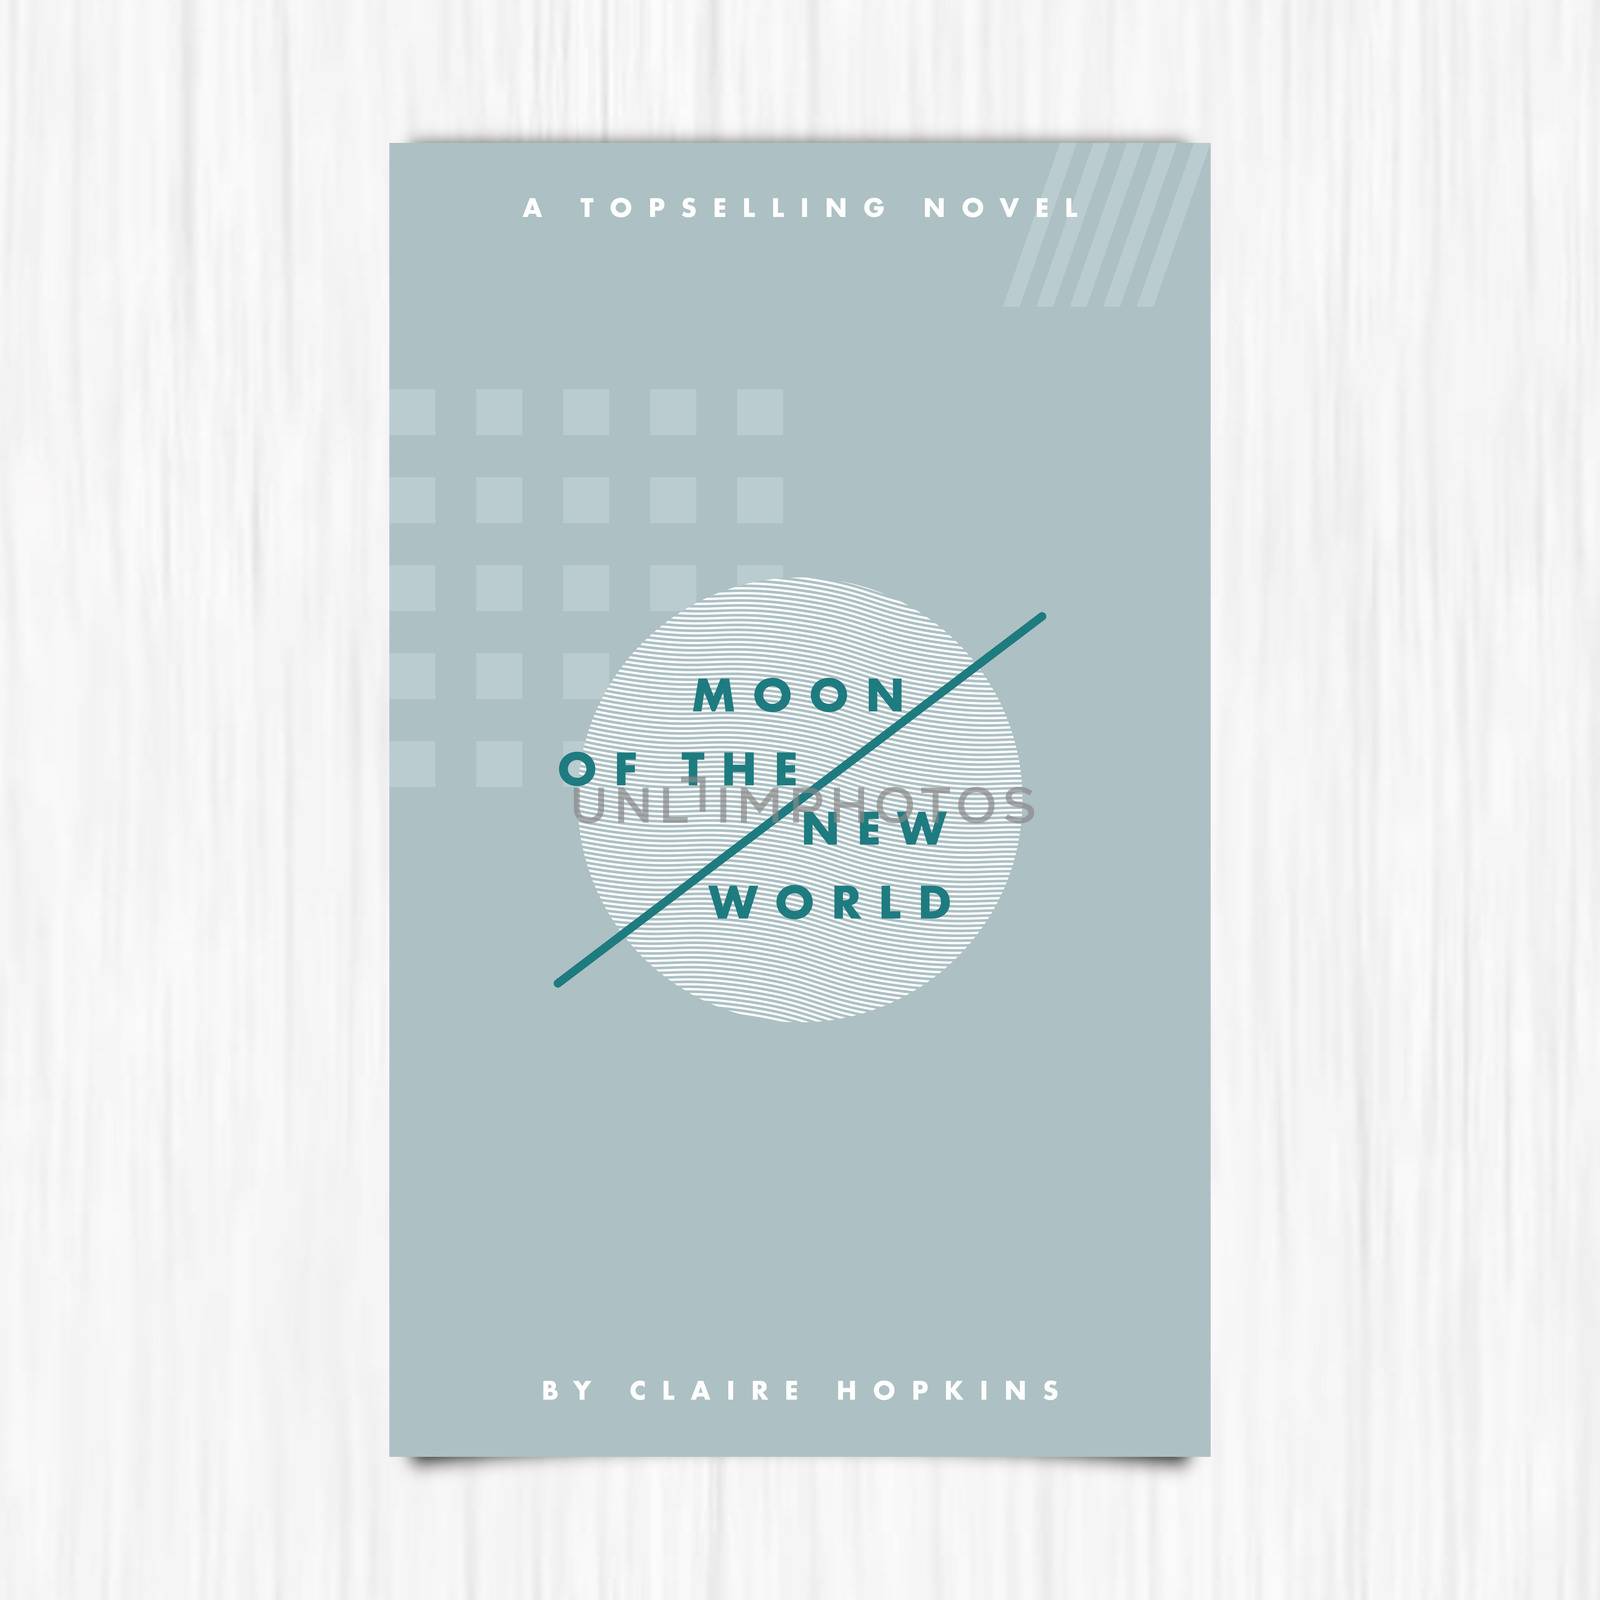 Vector of novel cover with moon of the new world against white background